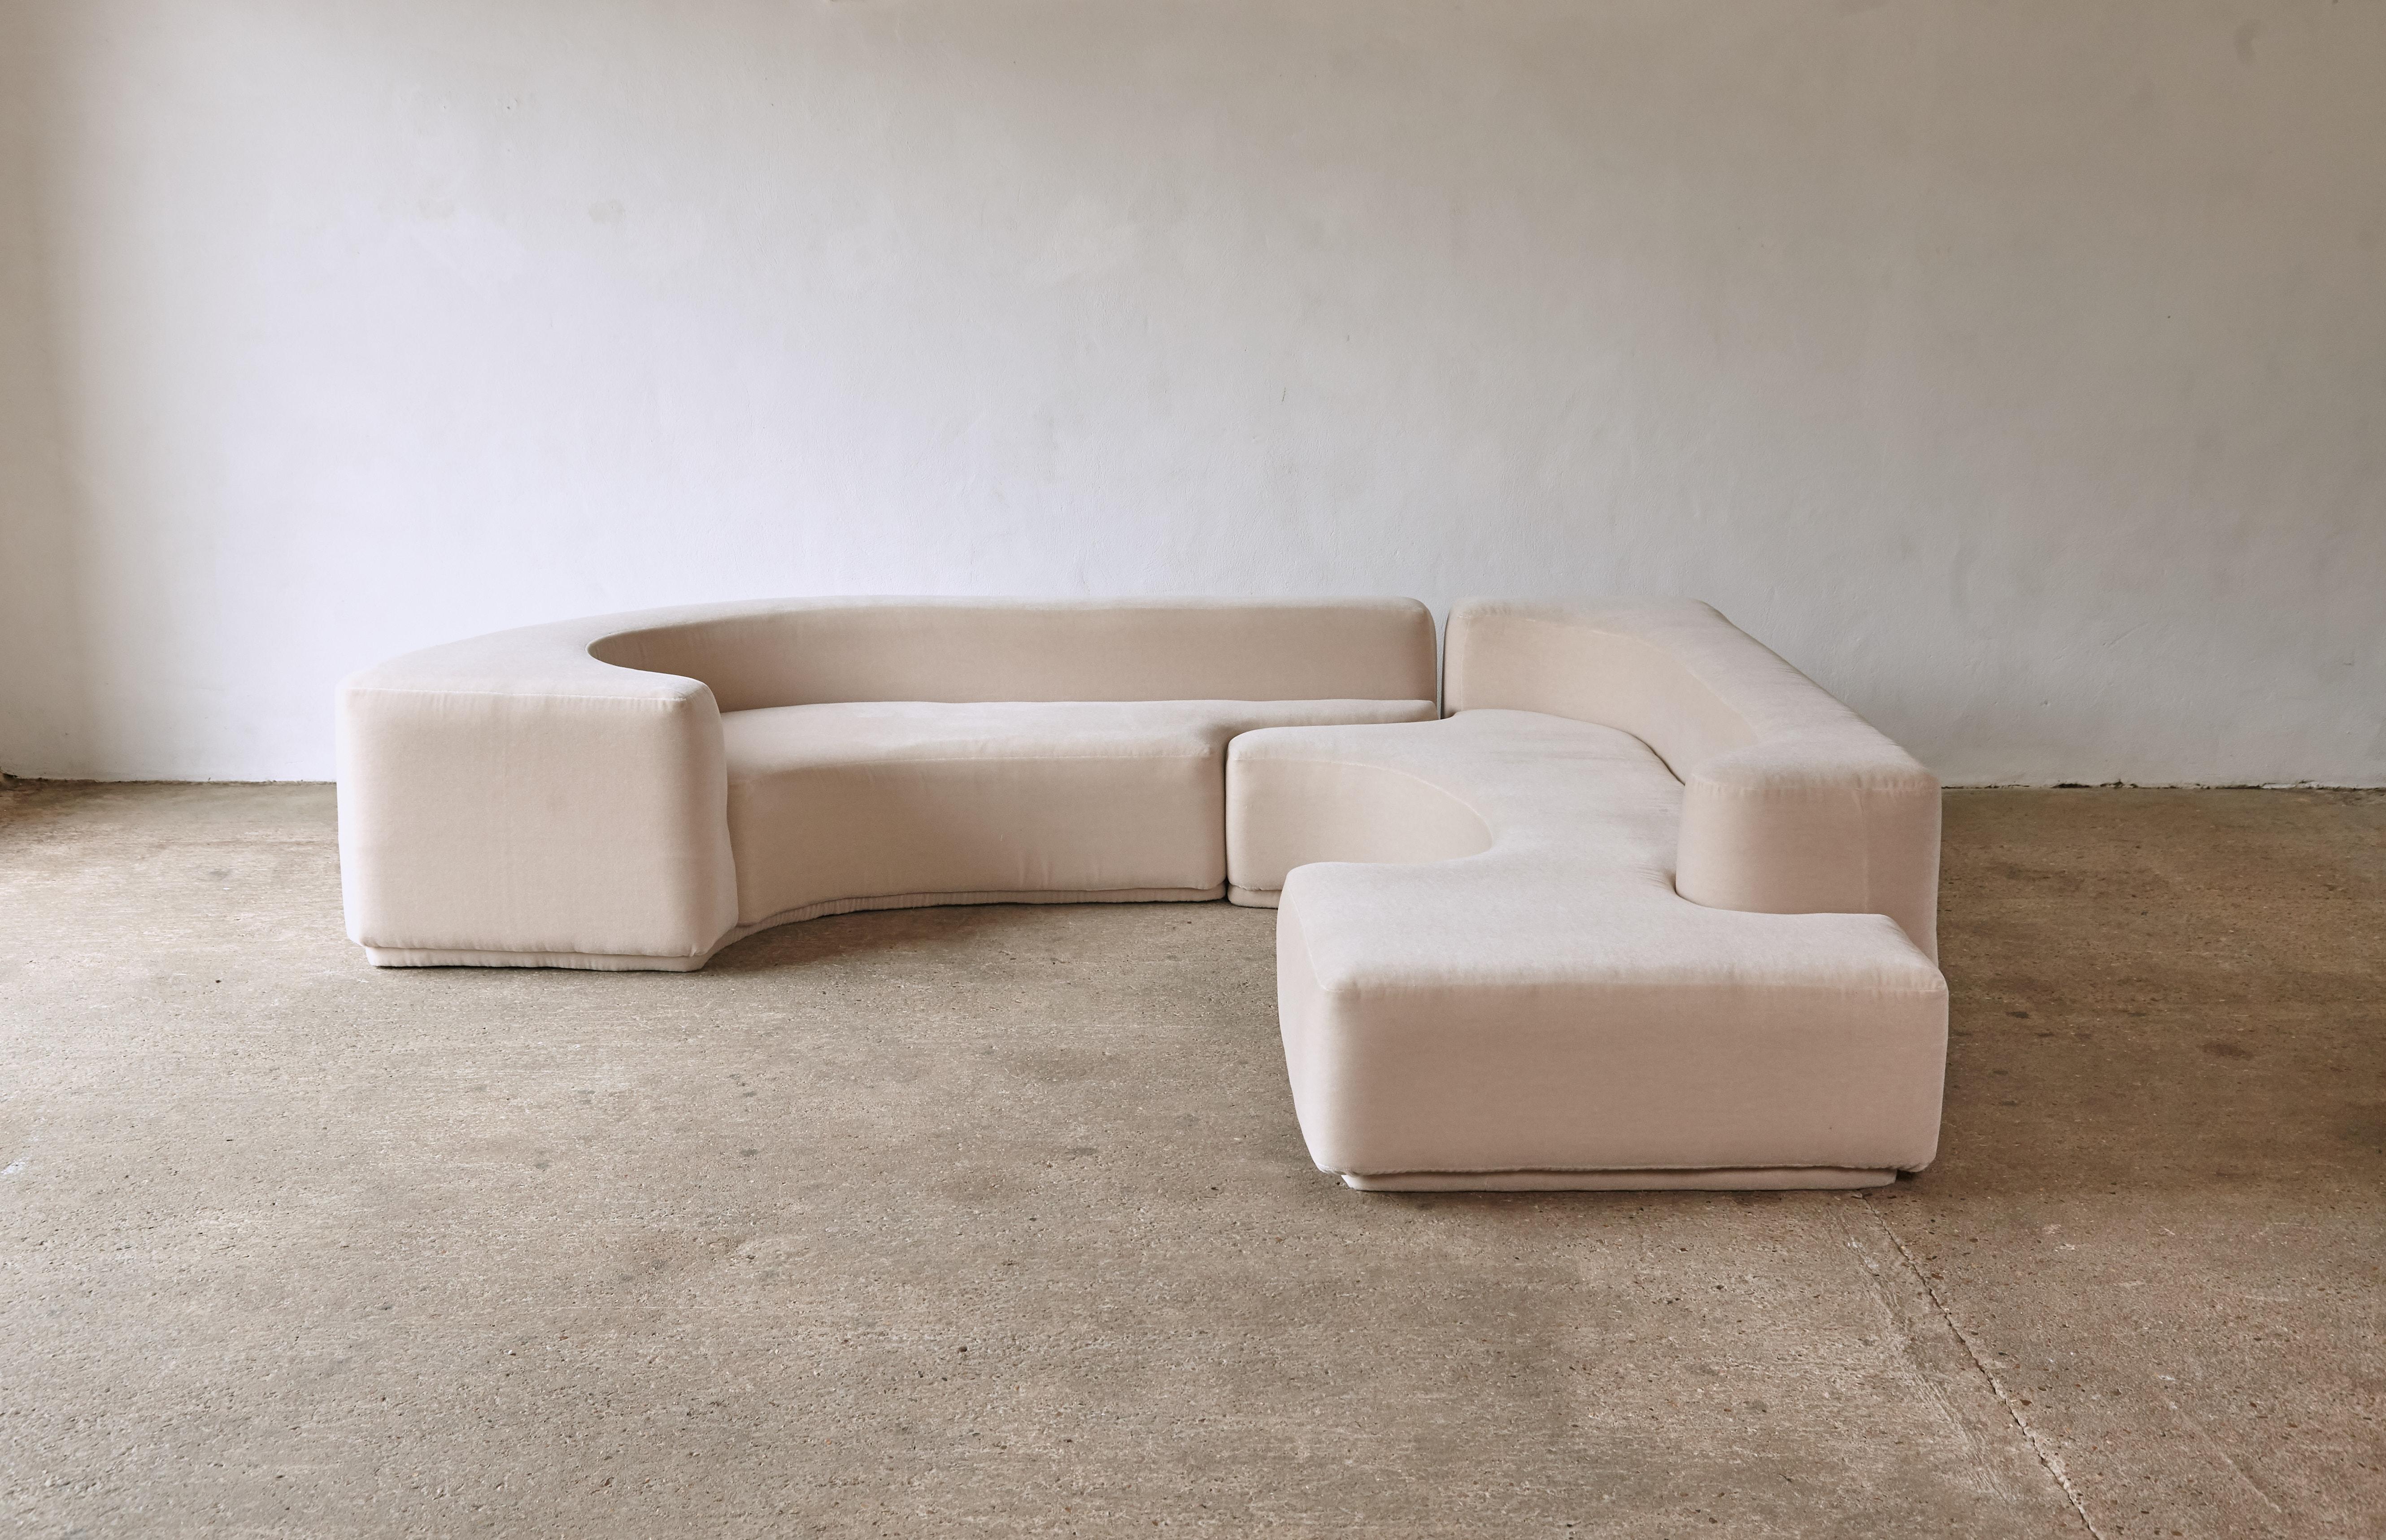 A Lara sofa by Roberto Pamio, Renato Toso and Noti Massari for Stilwood, Italy 1950s/1960s. Newly reupholstered in high quality 100% mohair fabric. Ships worldwide.


